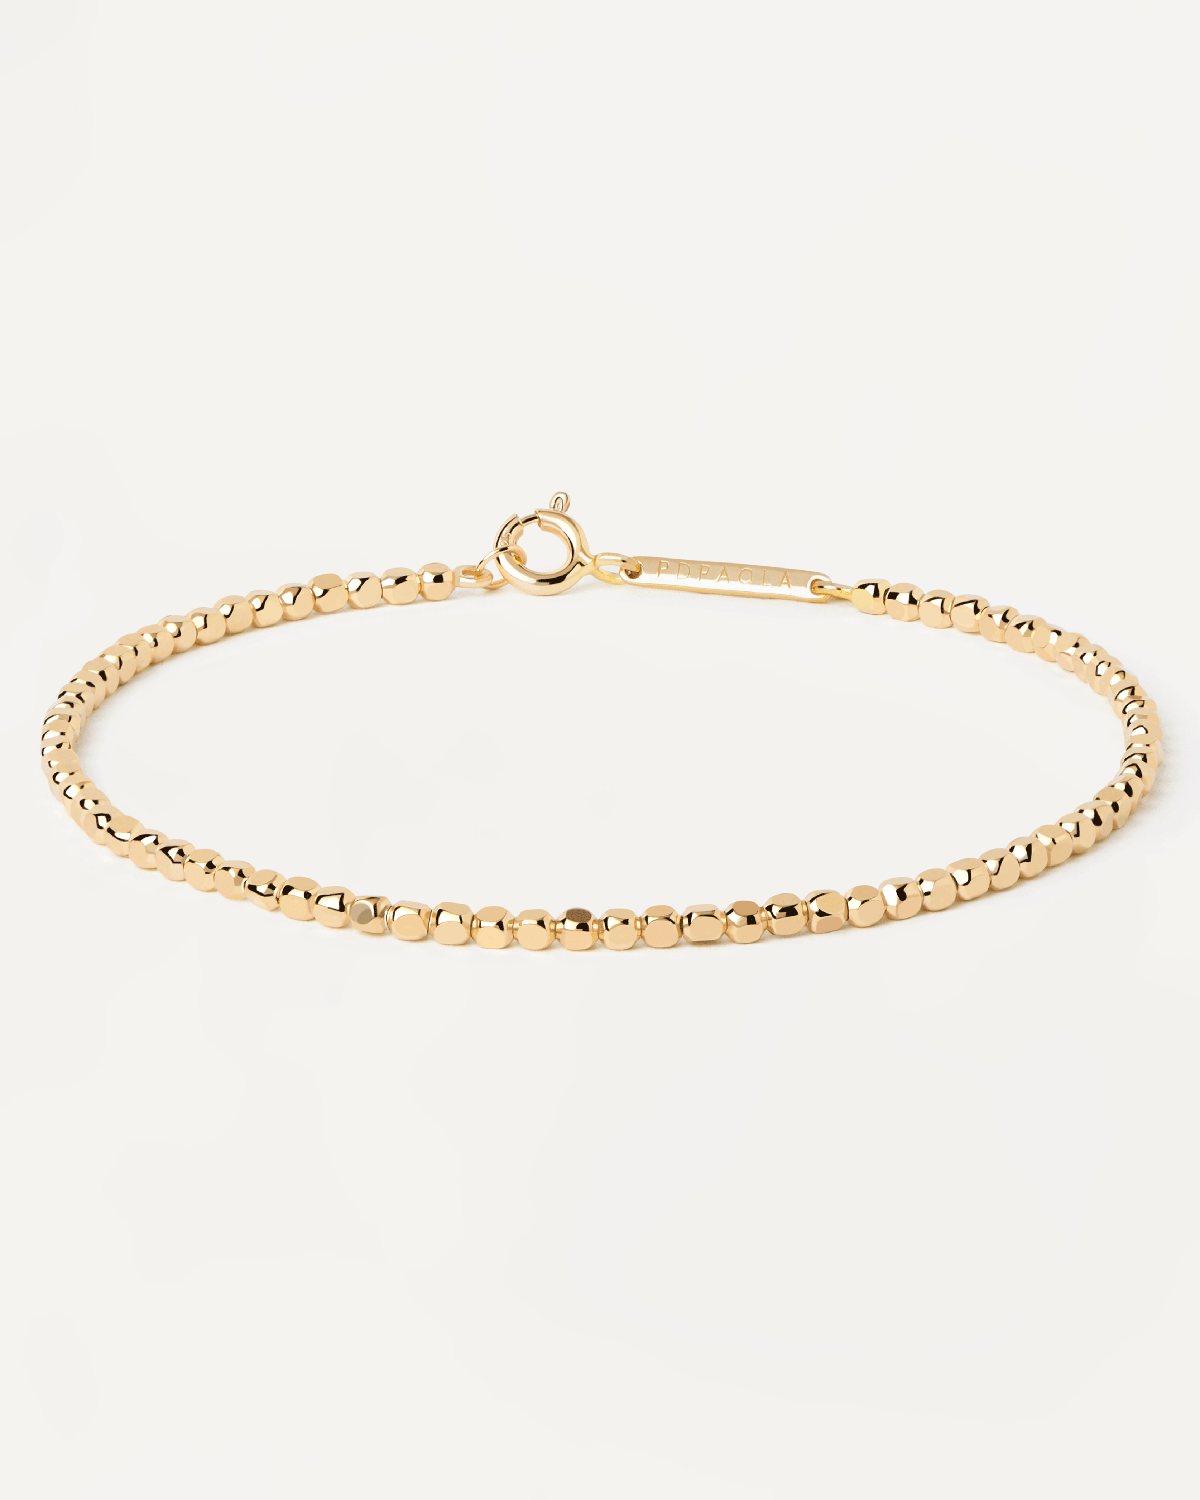 2023 Selection | Marina Chain Bracelet. Gold-plated silver bracelet with asymetric bead links. Get the latest arrival from PDPAOLA. Place your order safely and get this Best Seller. Free Shipping.